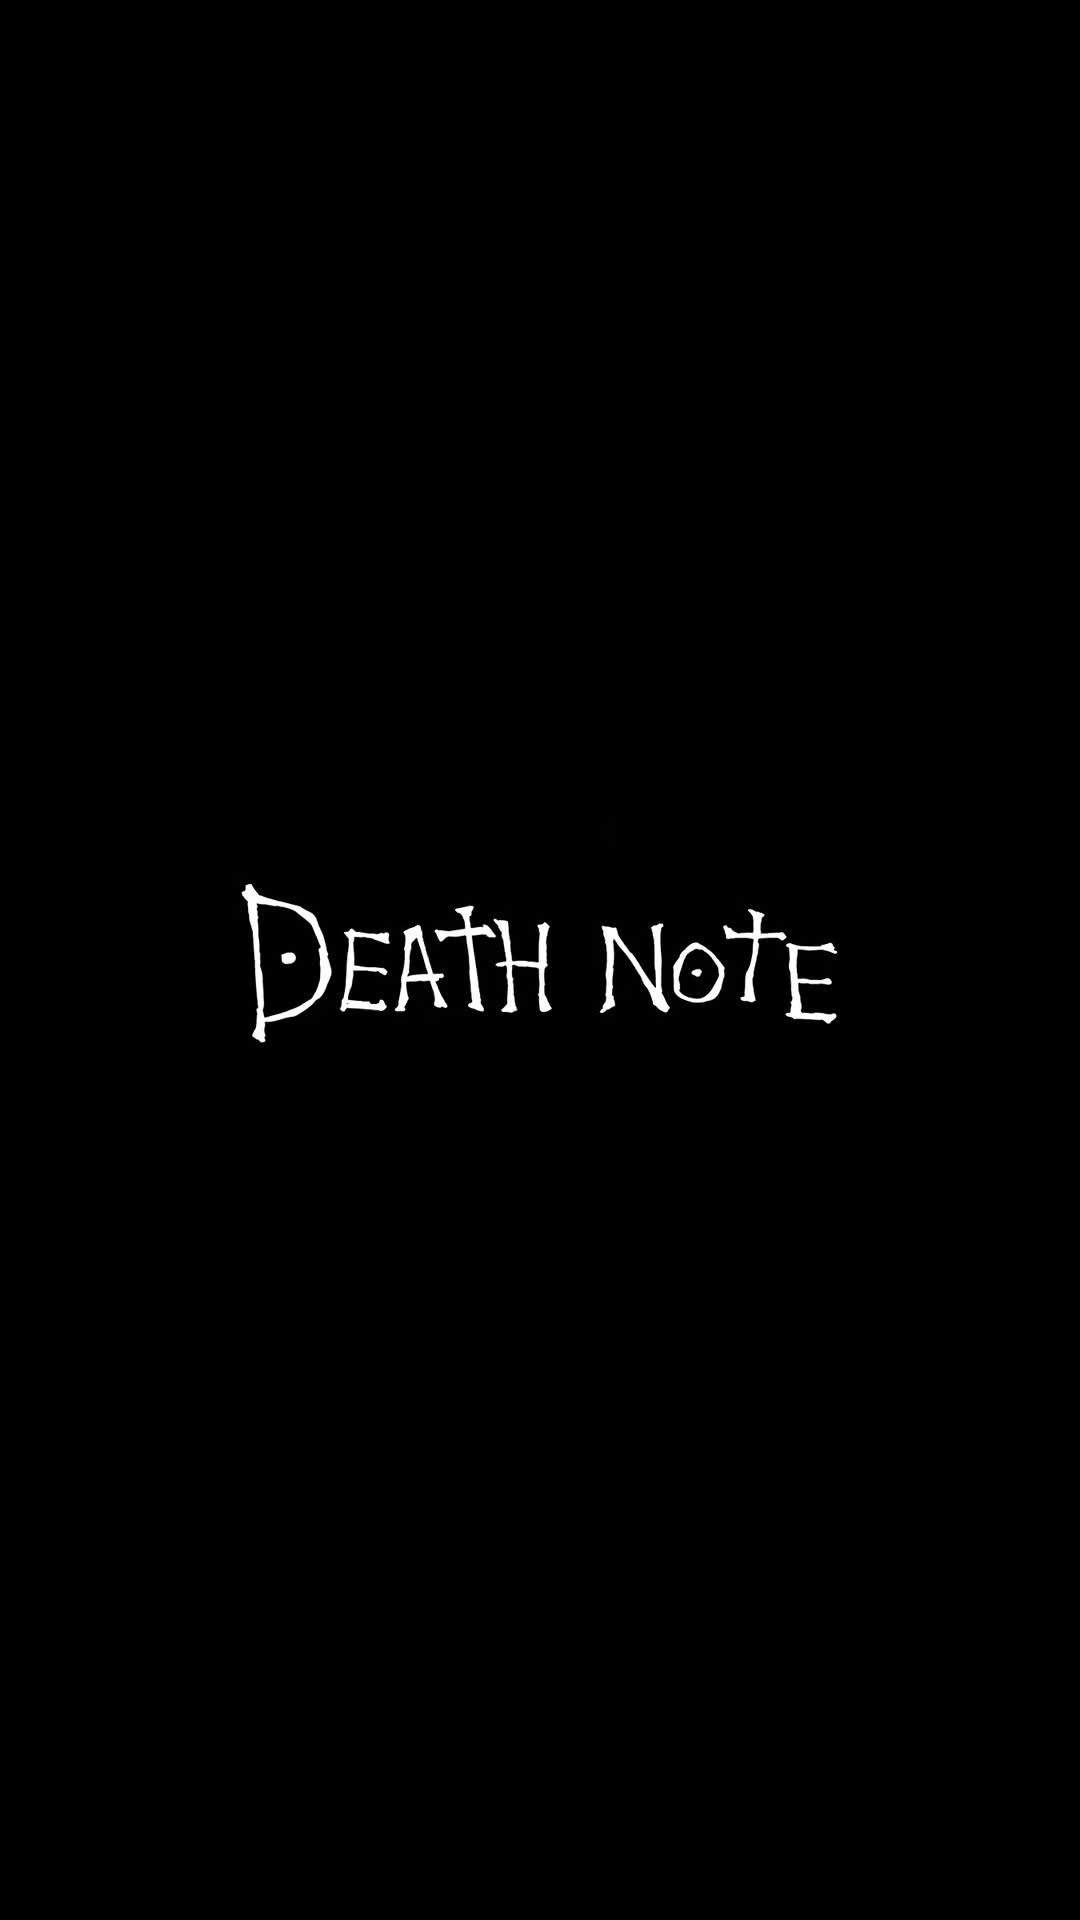 Death Note デスノート Iphone Wallpapers